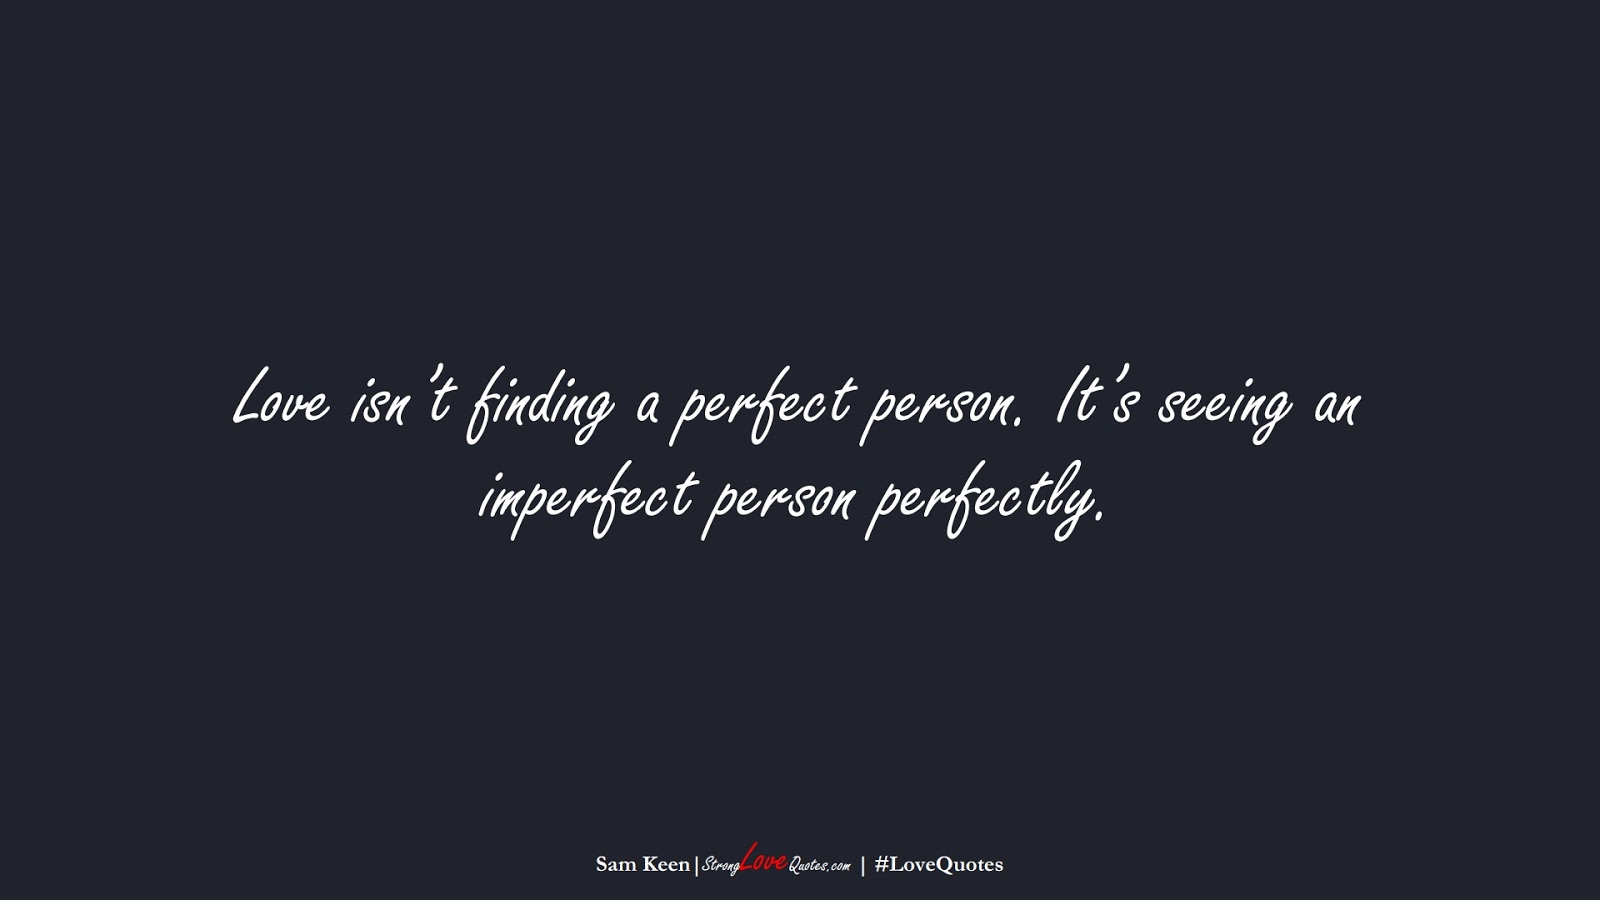 Love isn’t finding a perfect person. It’s seeing an imperfect person perfectly. (Sam Keen);  #LoveQuotes